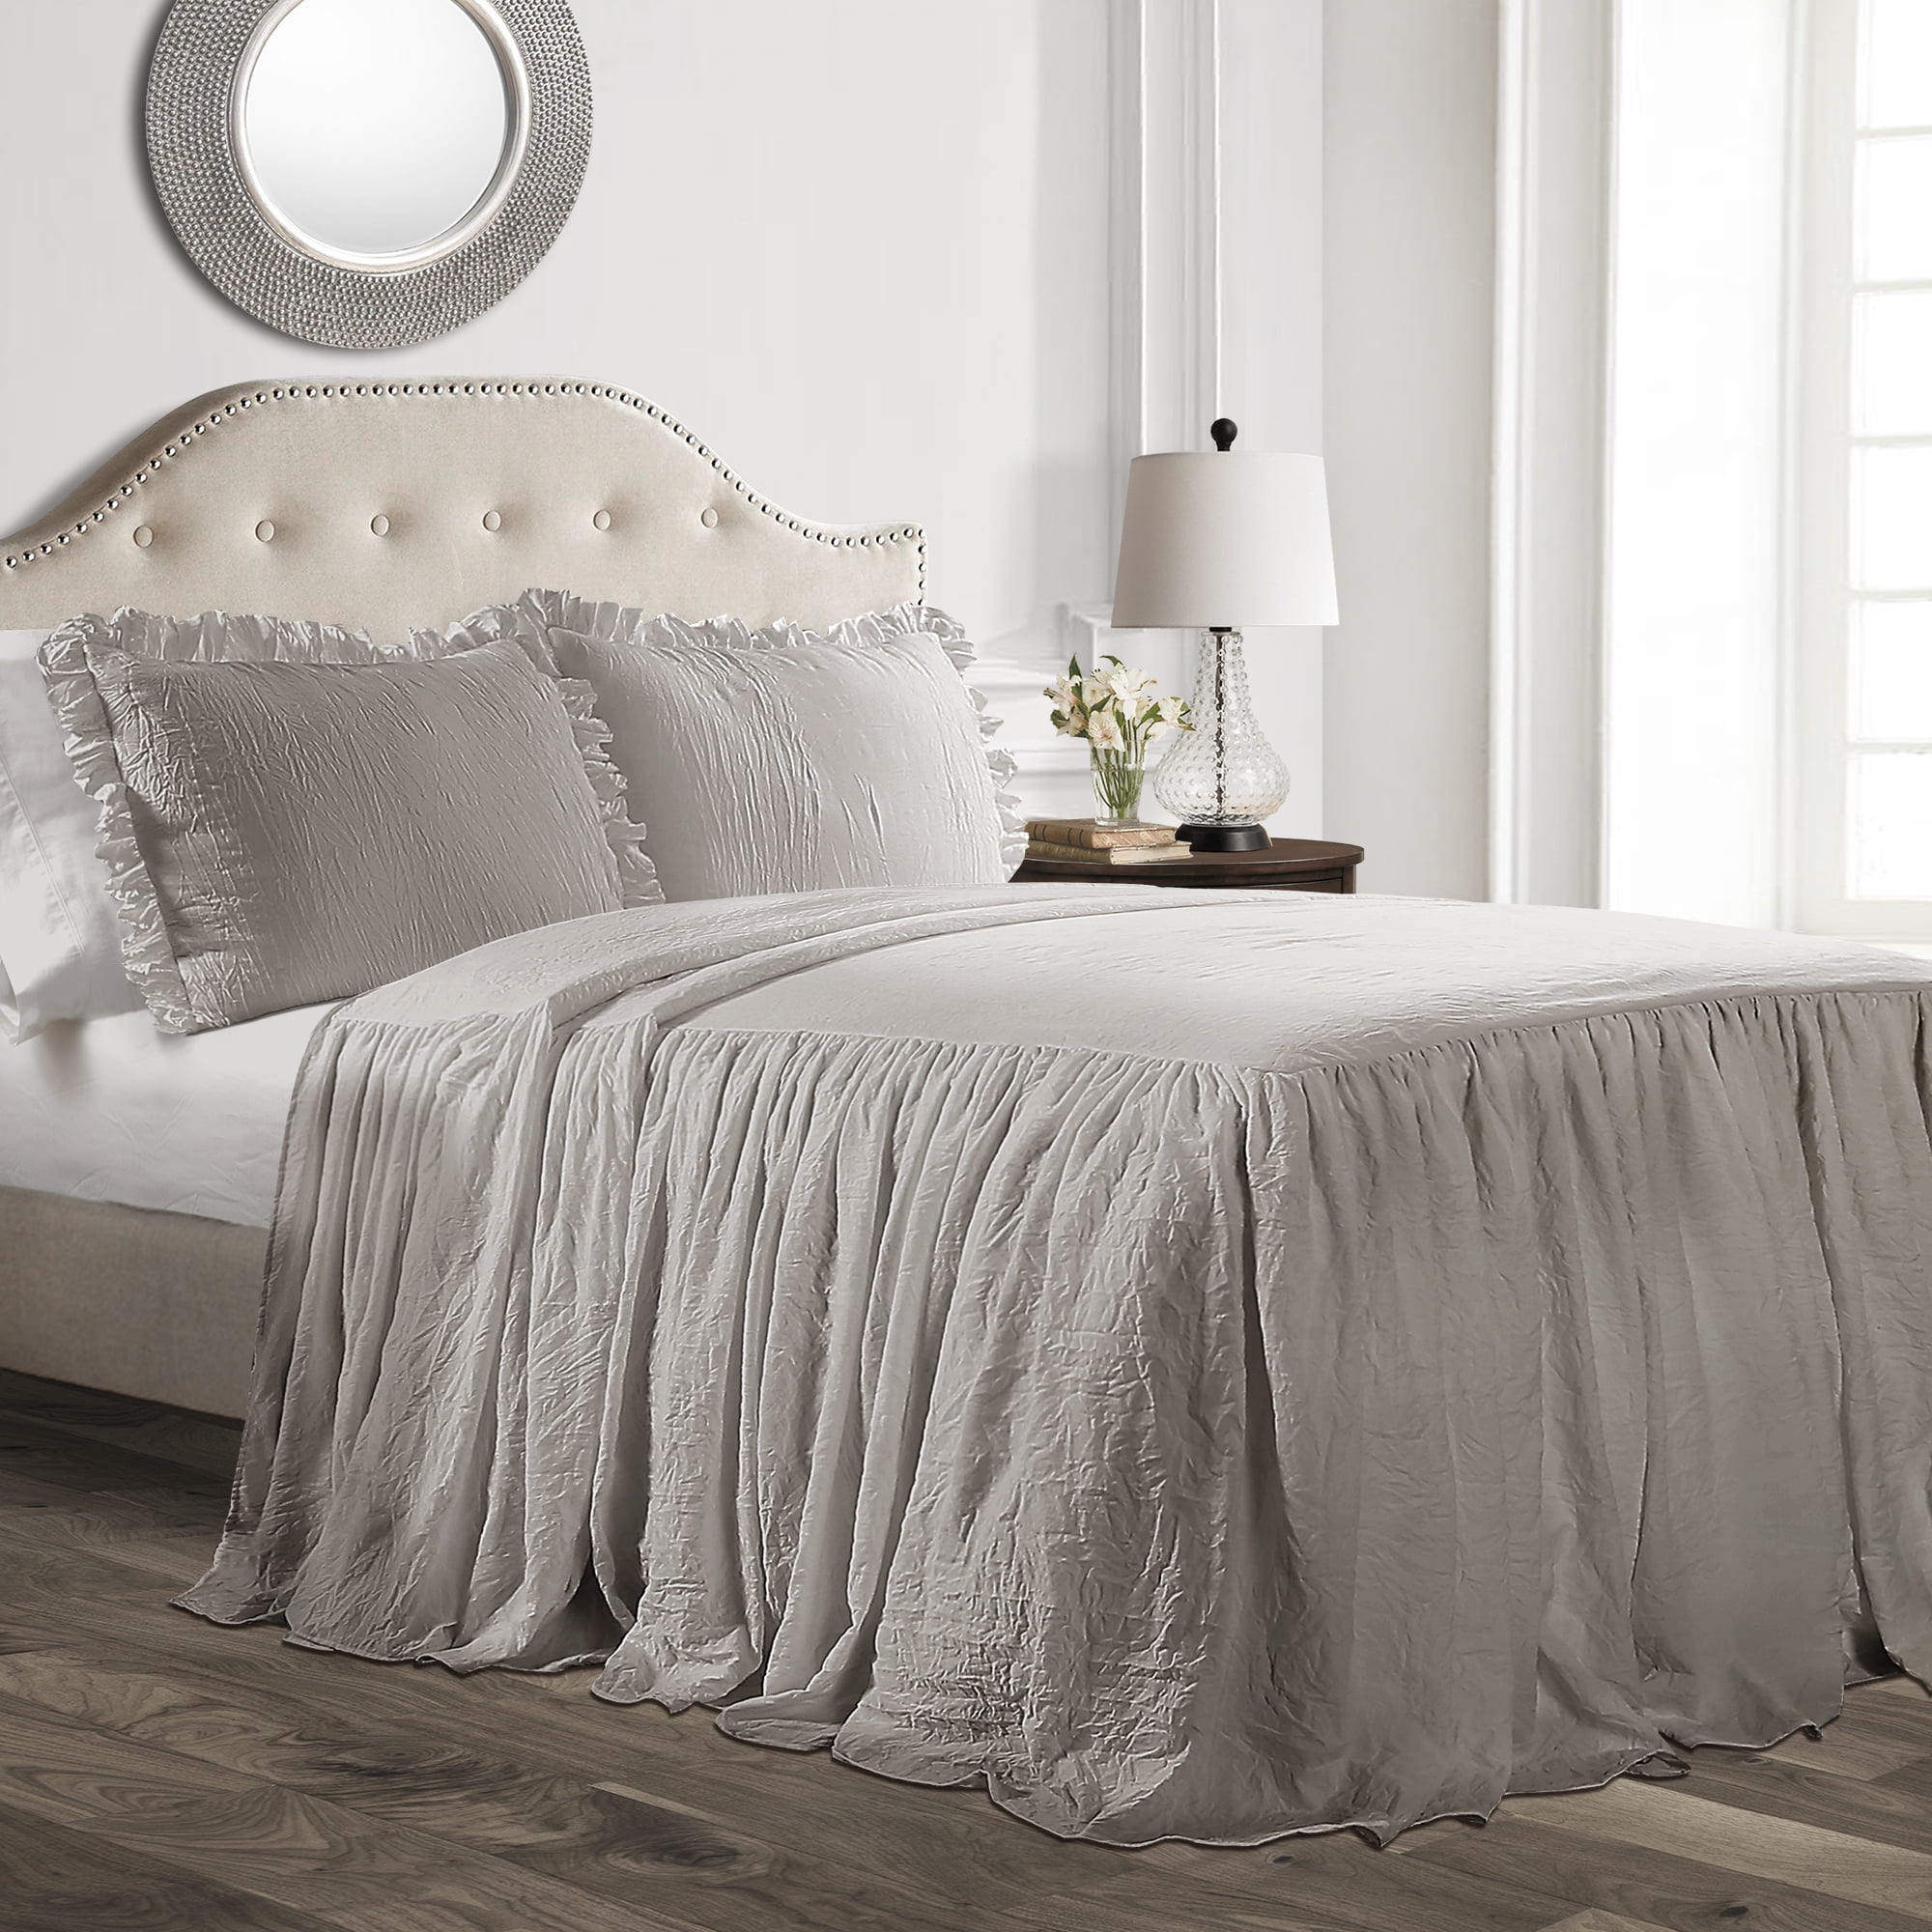 Details about   Lush Décor Belle 4 Piece Ruffled Comforter Set with Bed Skirt and 2 Pillow Shams 